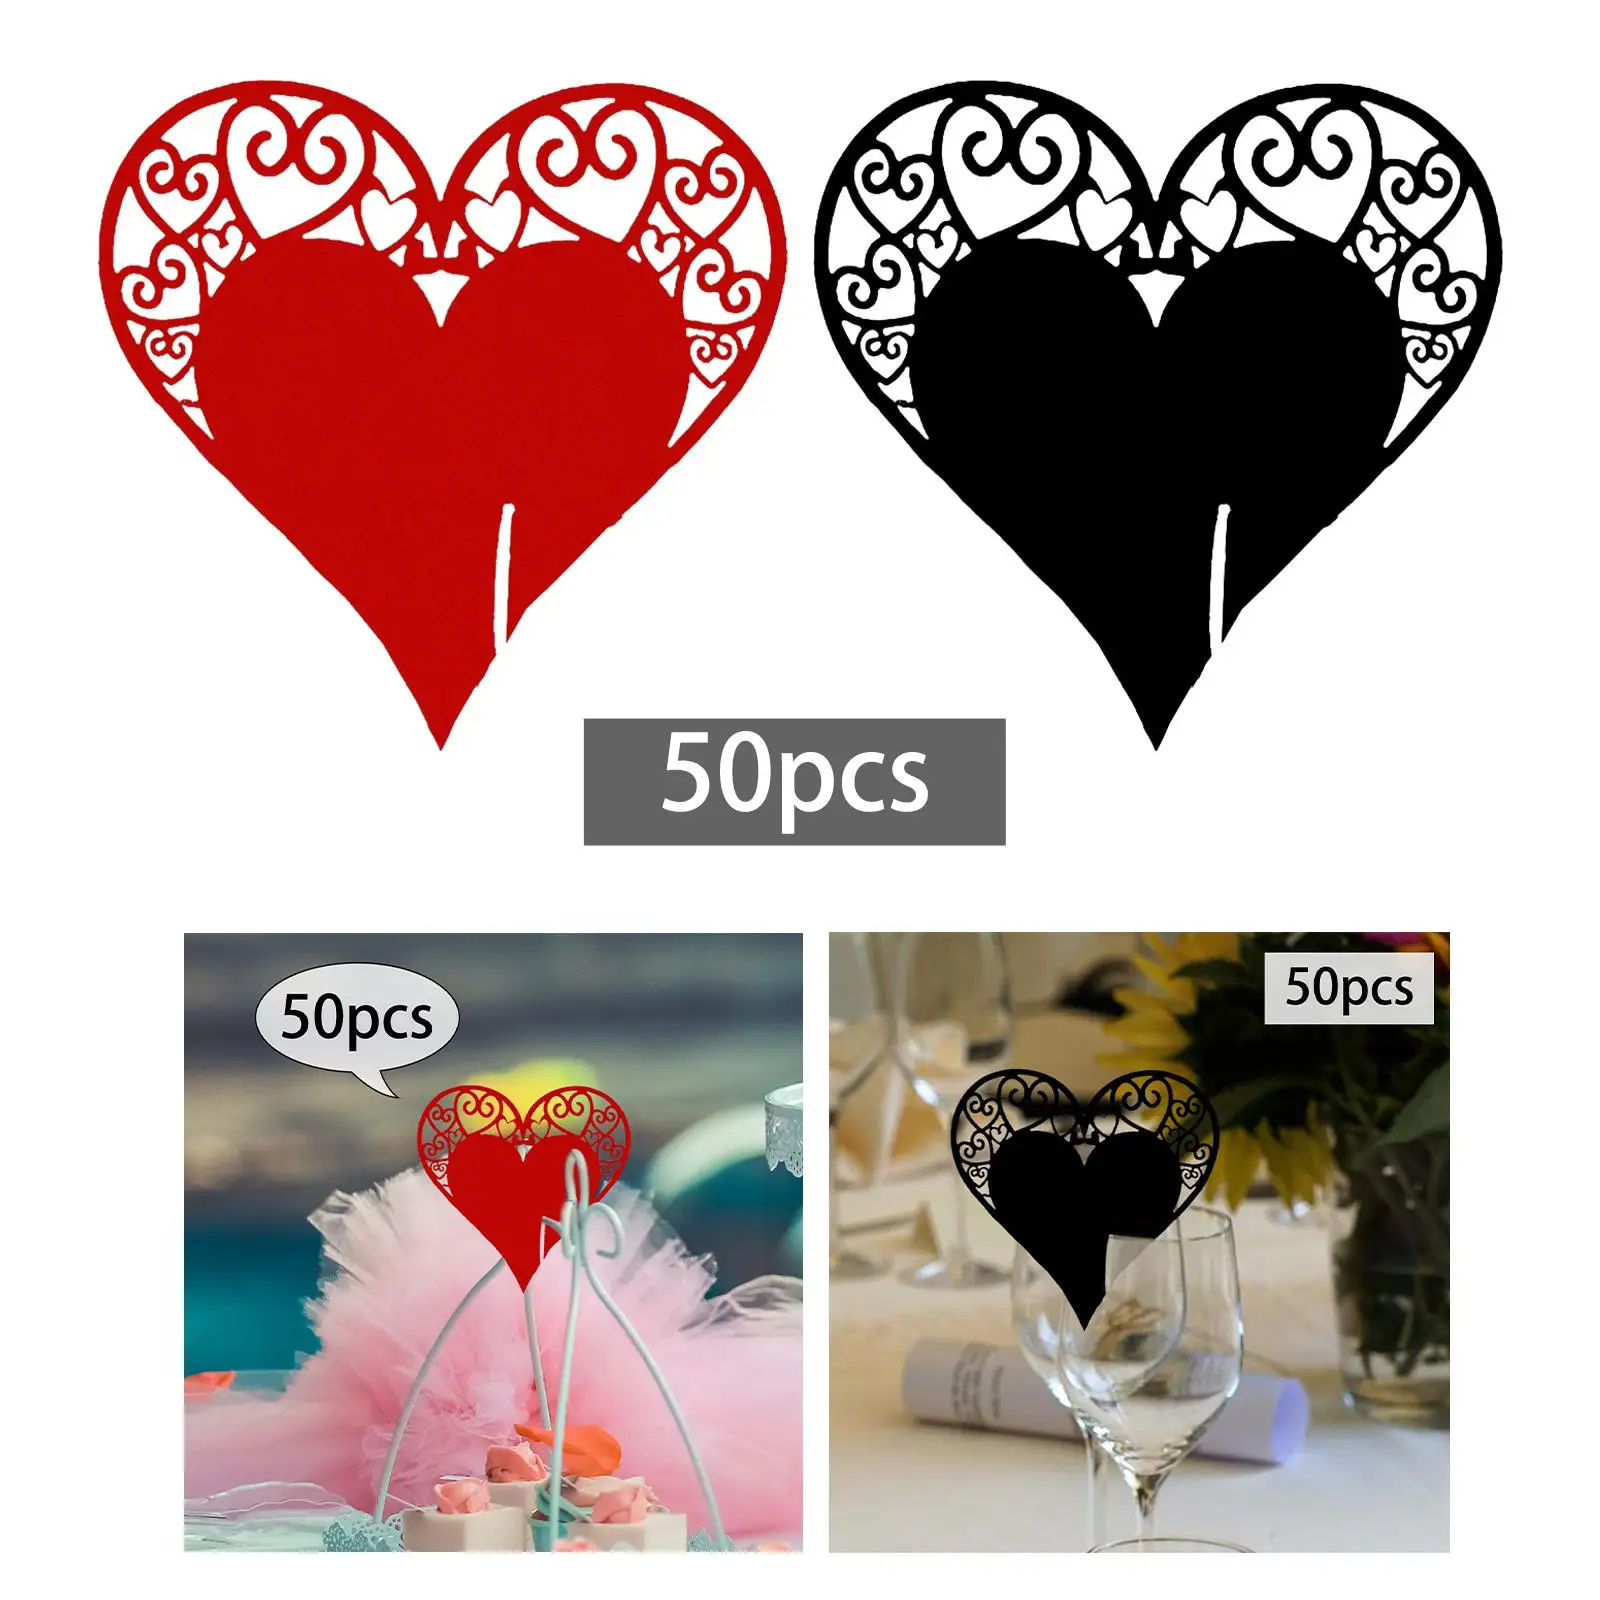 50 Pieces Heart Shape Paper Place Cards Greeting Cards Wine Glass Place Cards for Restaurant Wedding Parties Dinner Birthday